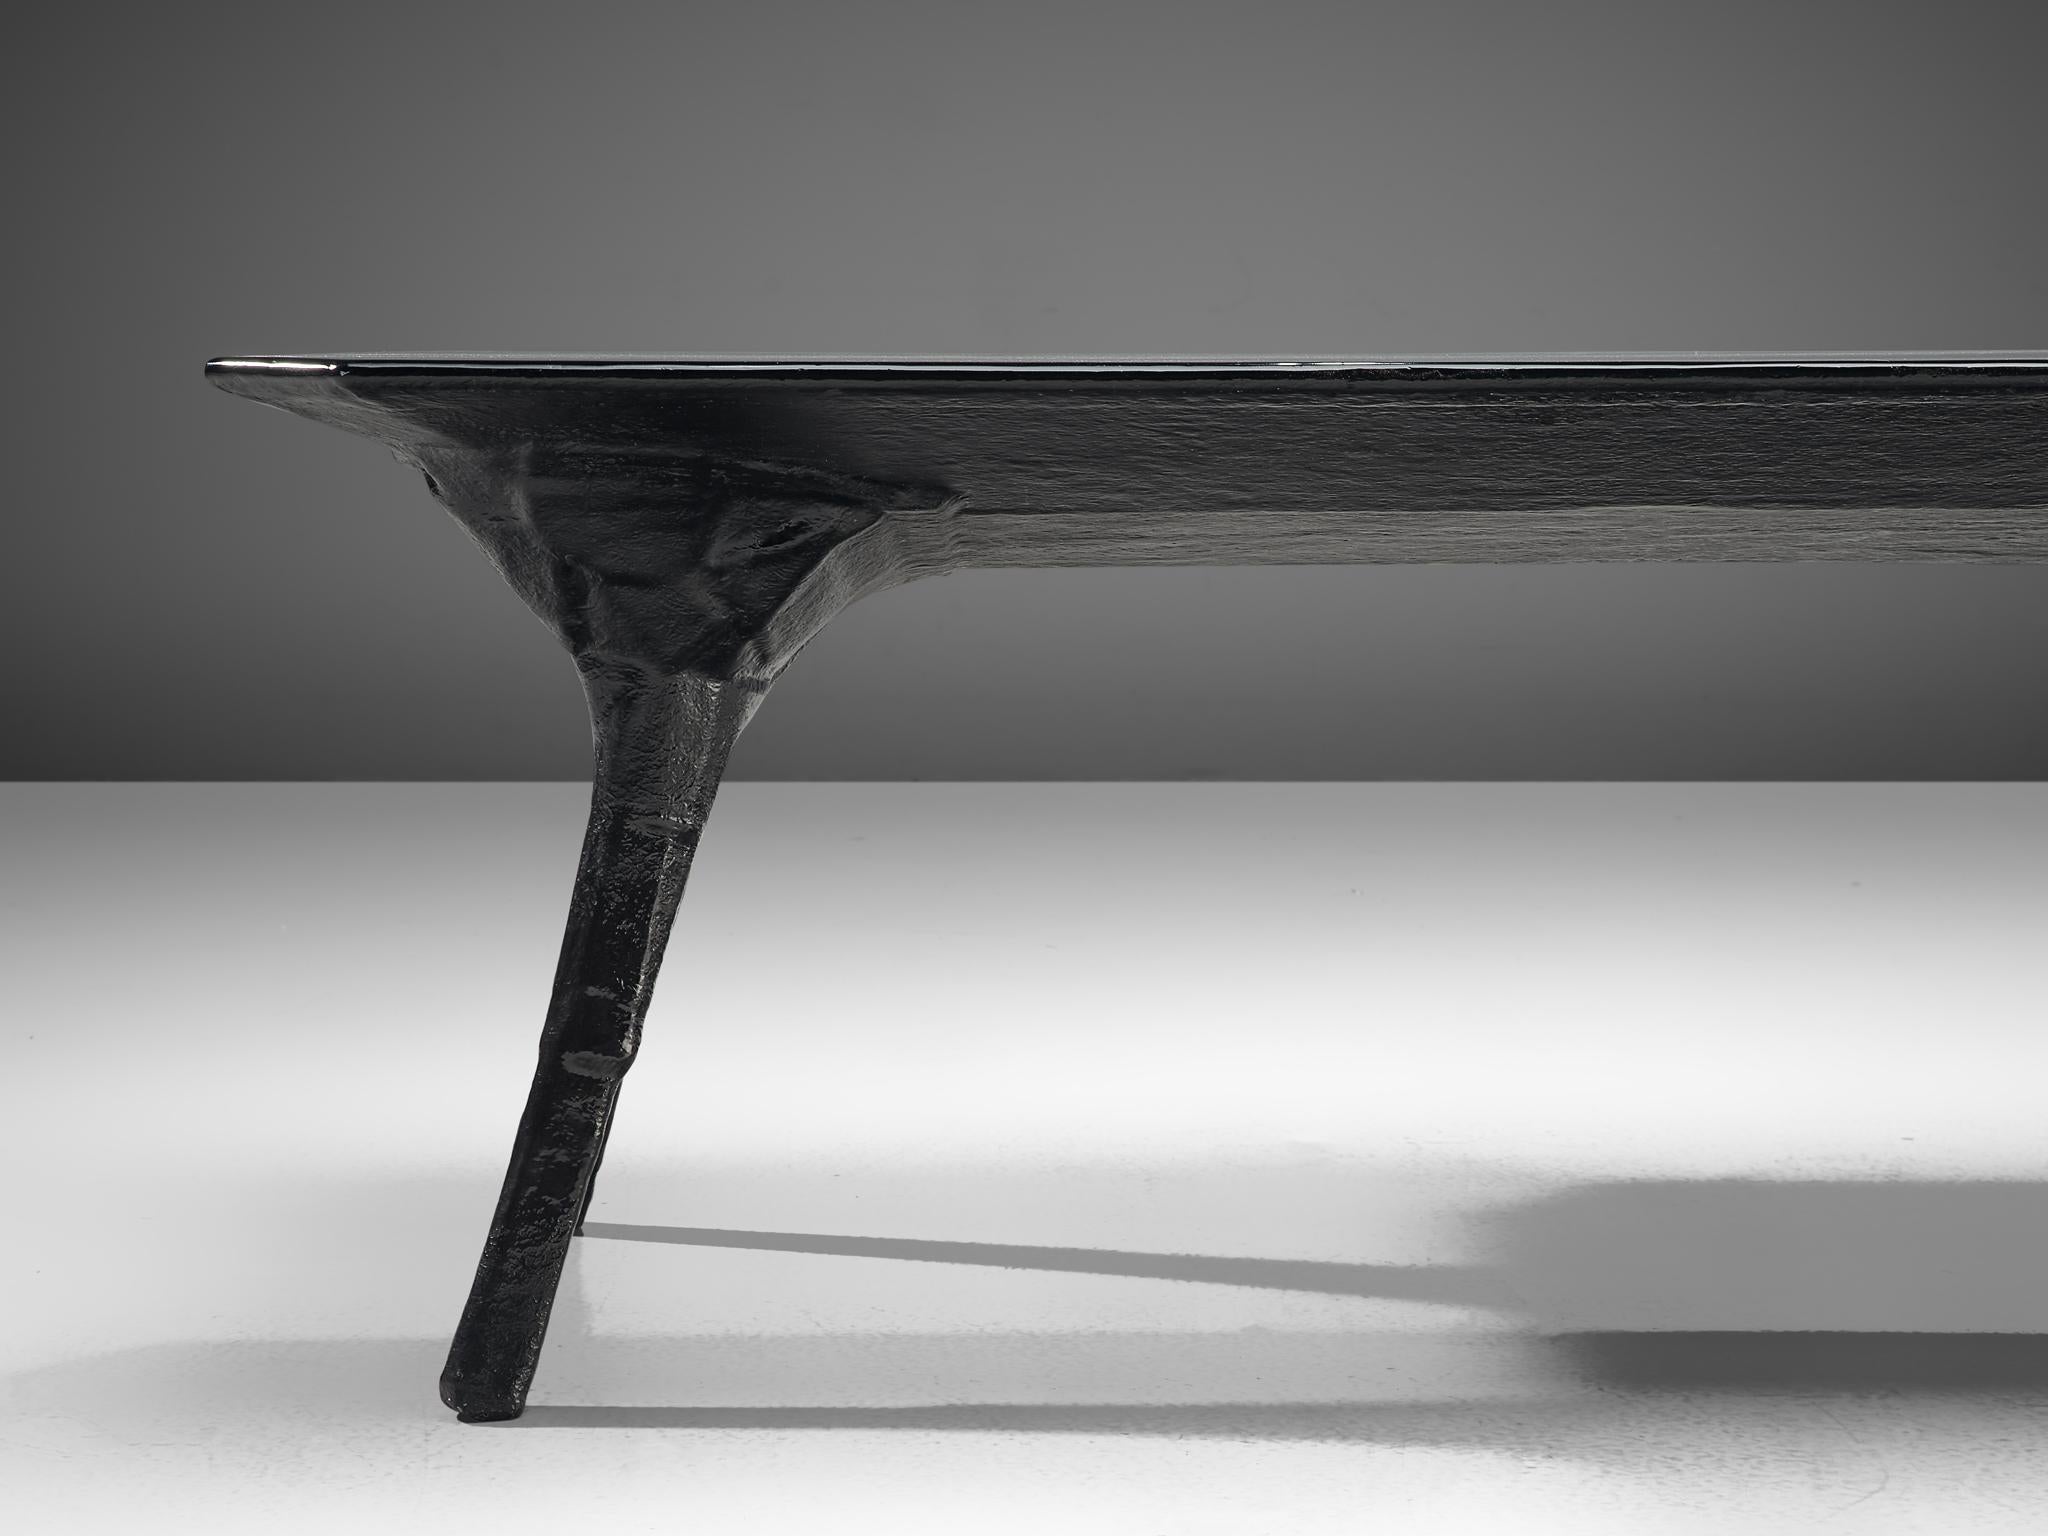 El Ultimo Grito Dining Table with Sculptural Legs 2